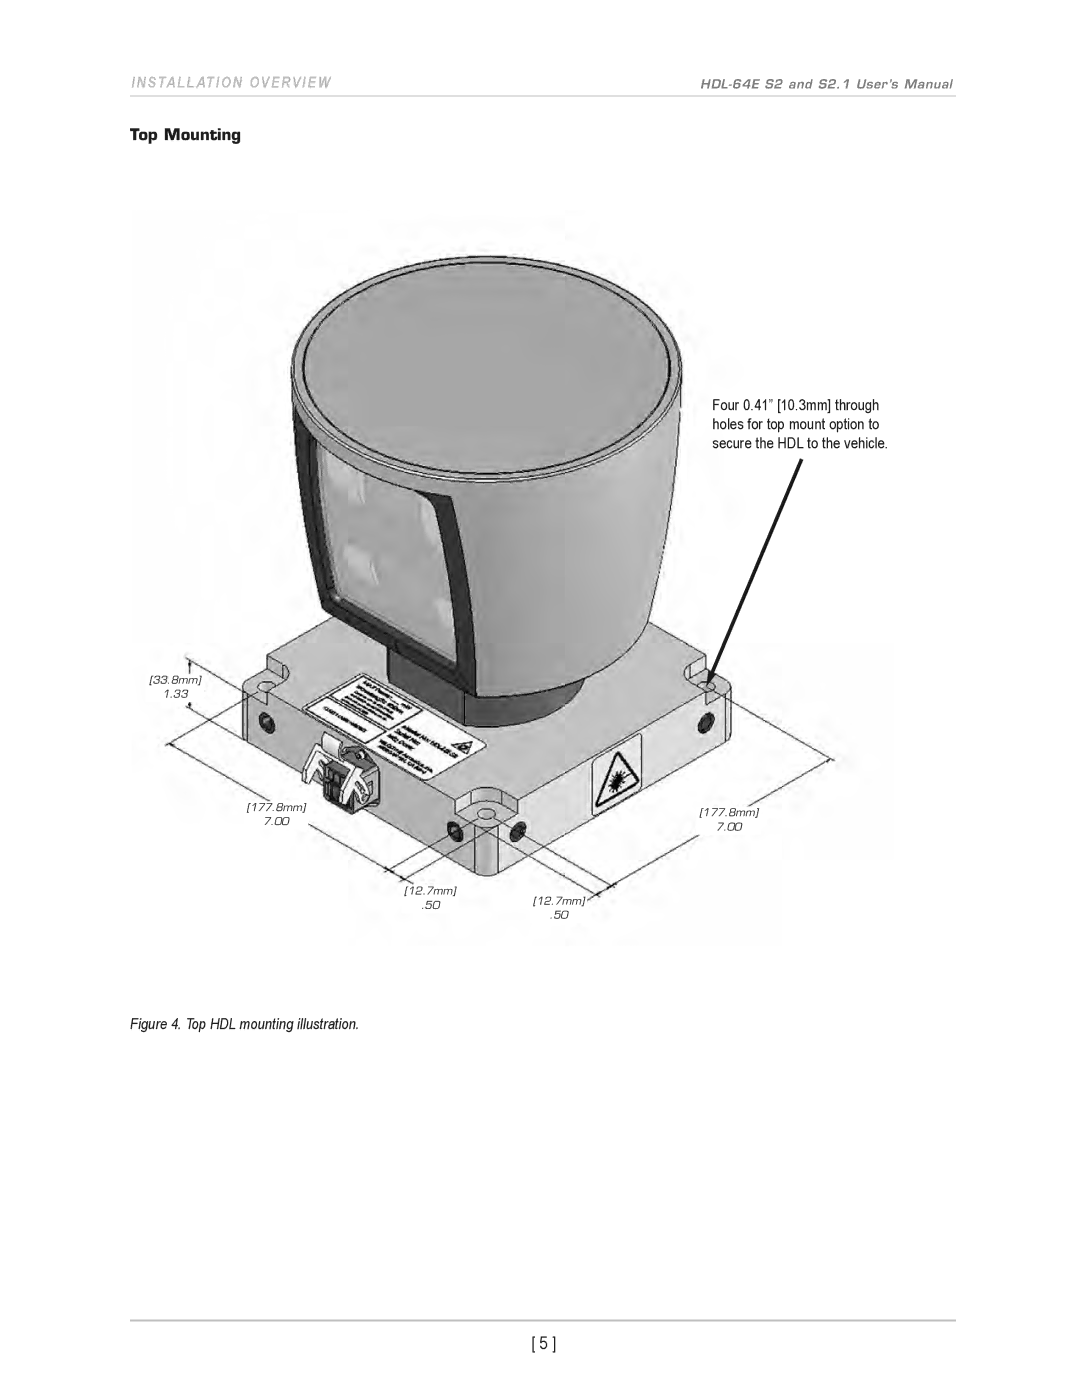 Velodyne Acoustics HDL-64E S2.1 user manual Top Mounting, Top HDL mounting illustration 